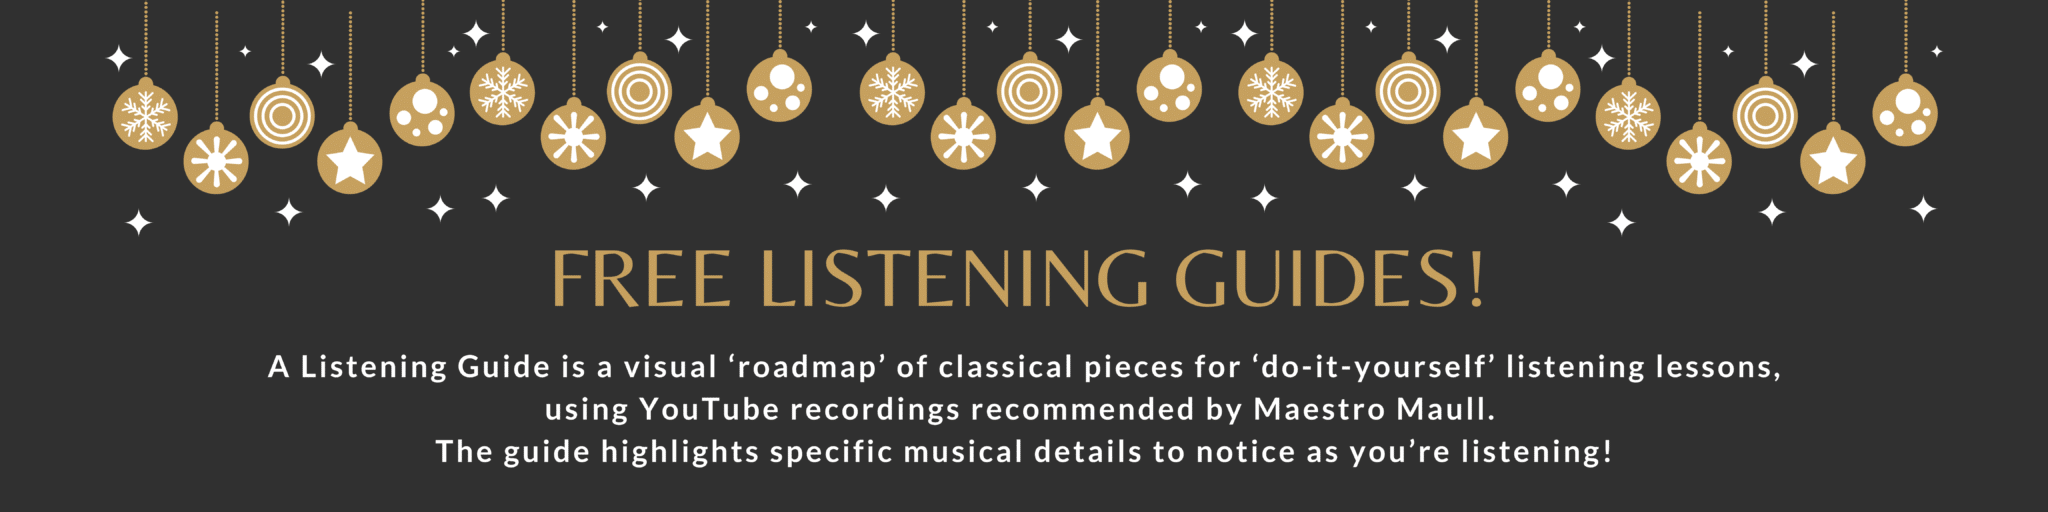 Free Listening Guide Banner: A Listening Guide is a visual roadmap of classical pieces for do-it-yourself listening lessons, using YouTube recordings recommended by Maestro Maull. The guide highlights specific musical details to notice as you're listening!